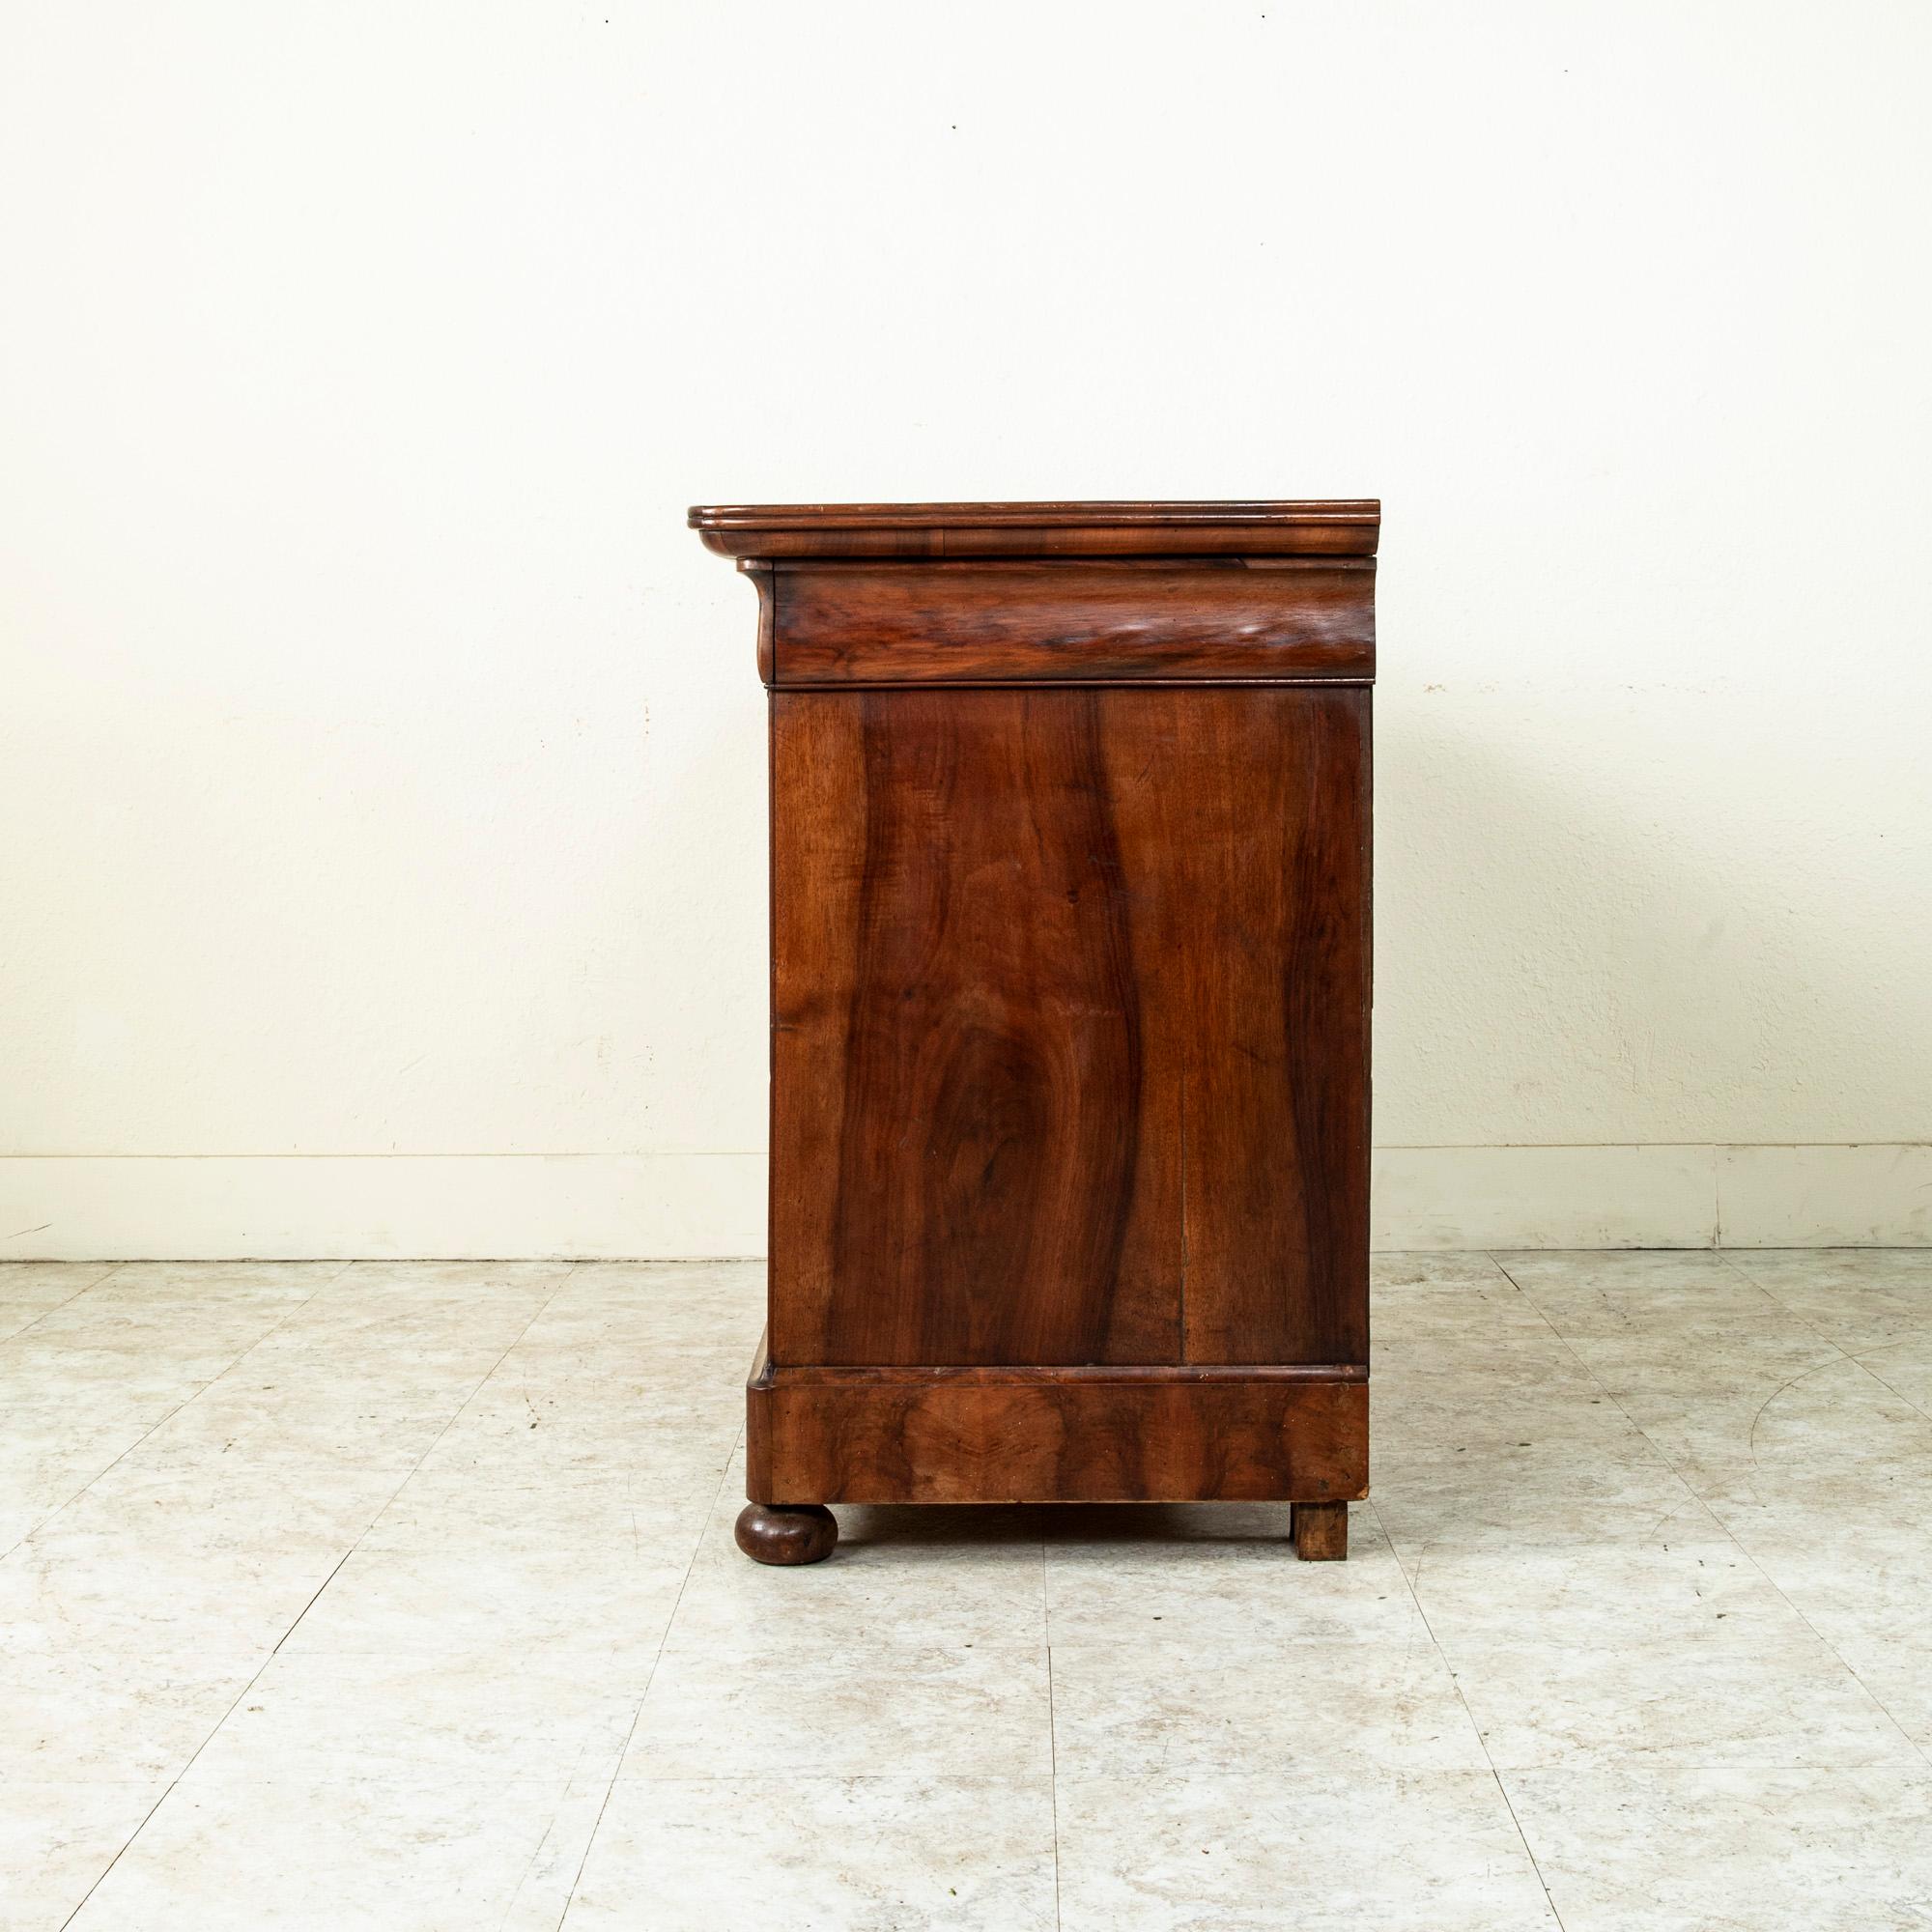 Bronze Mid-19th Century French Restauration Period Burl Walnut Chest of Drawers For Sale